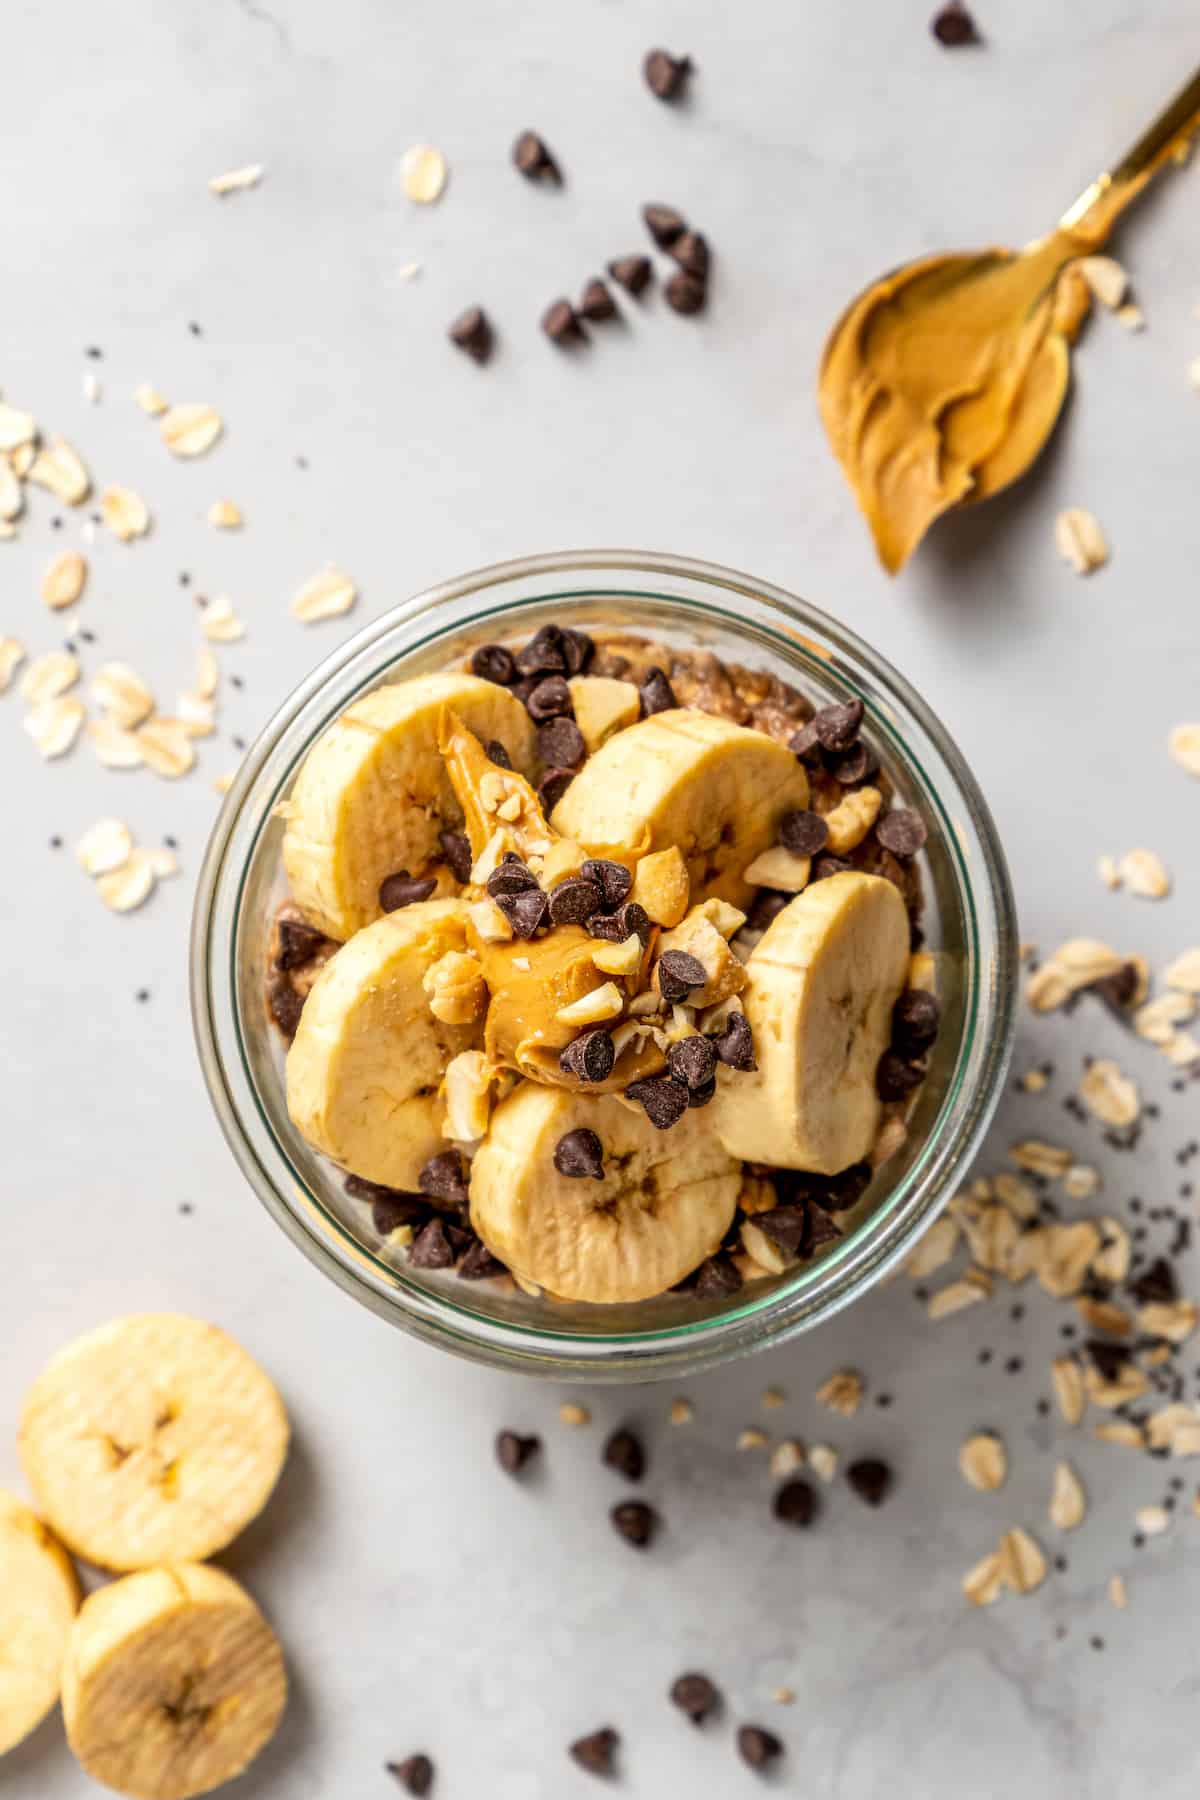 Overhead view of chocolate peanut butter high-protein overnight oats in jar